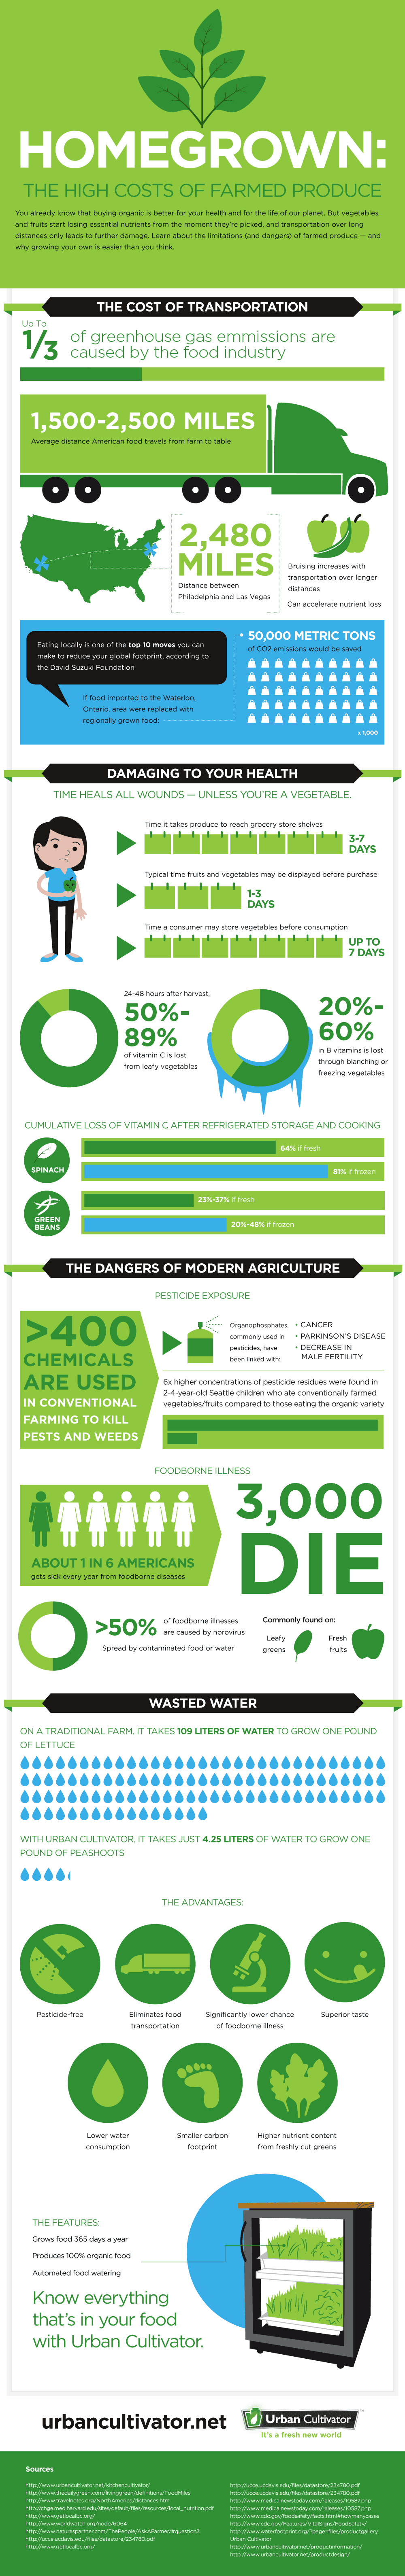 homegrown-infographic-2331275